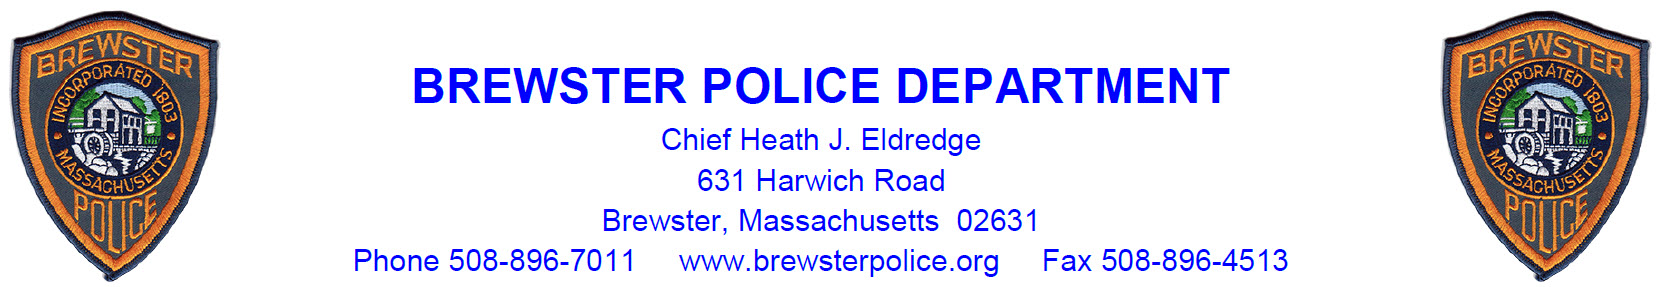 Brewster Police Department, MA Public Safety Jobs